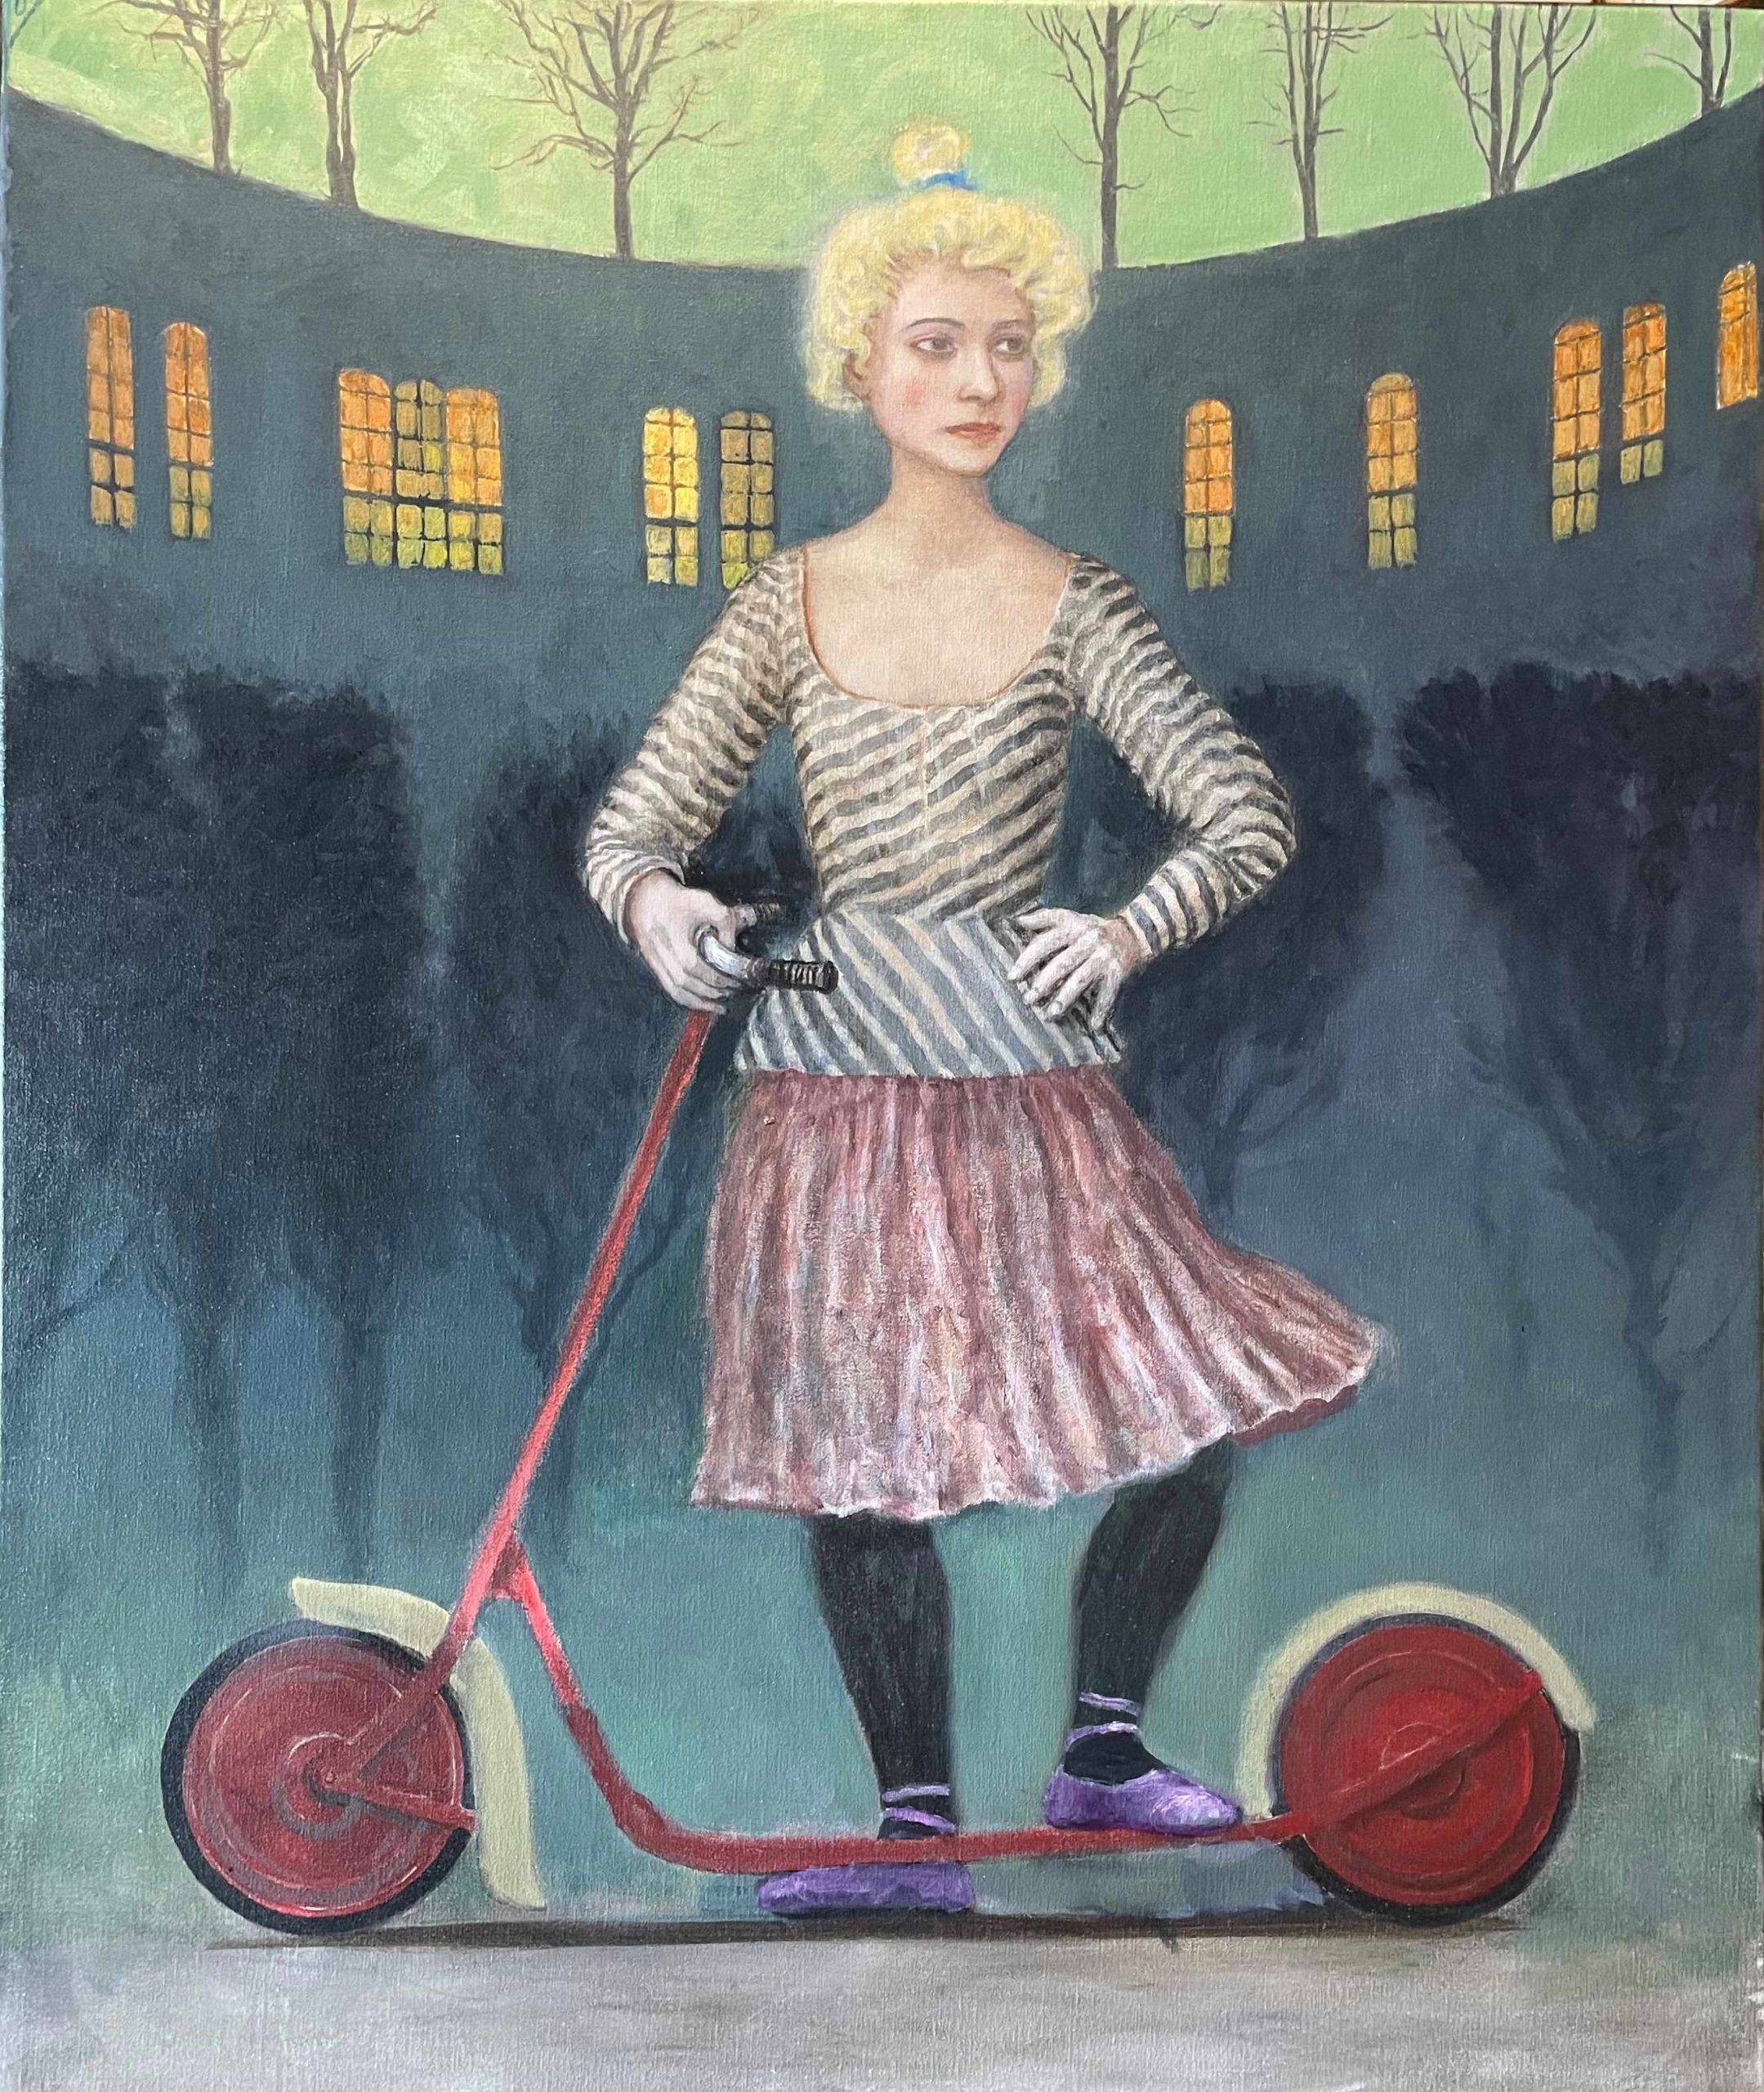 Mike Worrall 'The Red Scooter' oil on canvas 90 x 76cm $11500